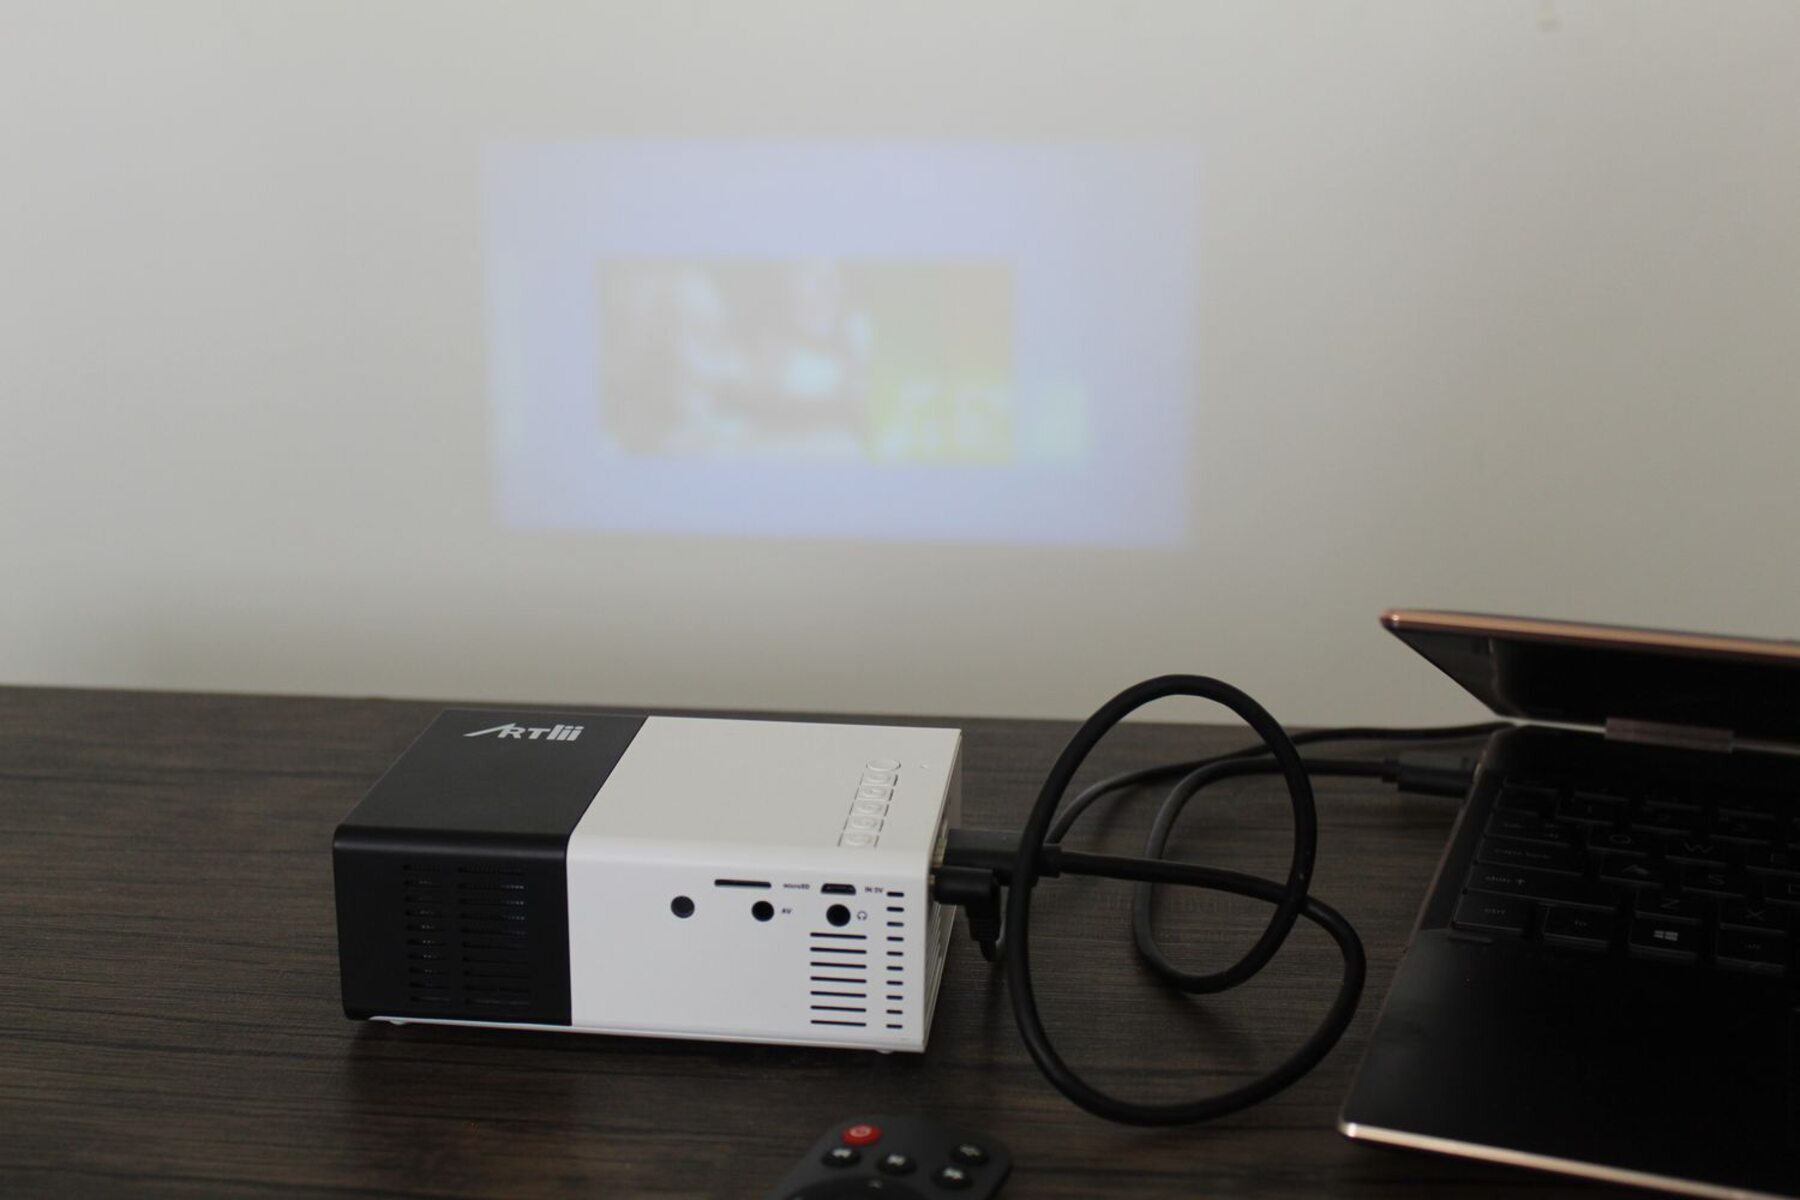 how-do-you-display-a-laptop-screen-image-through-a-connected-projector